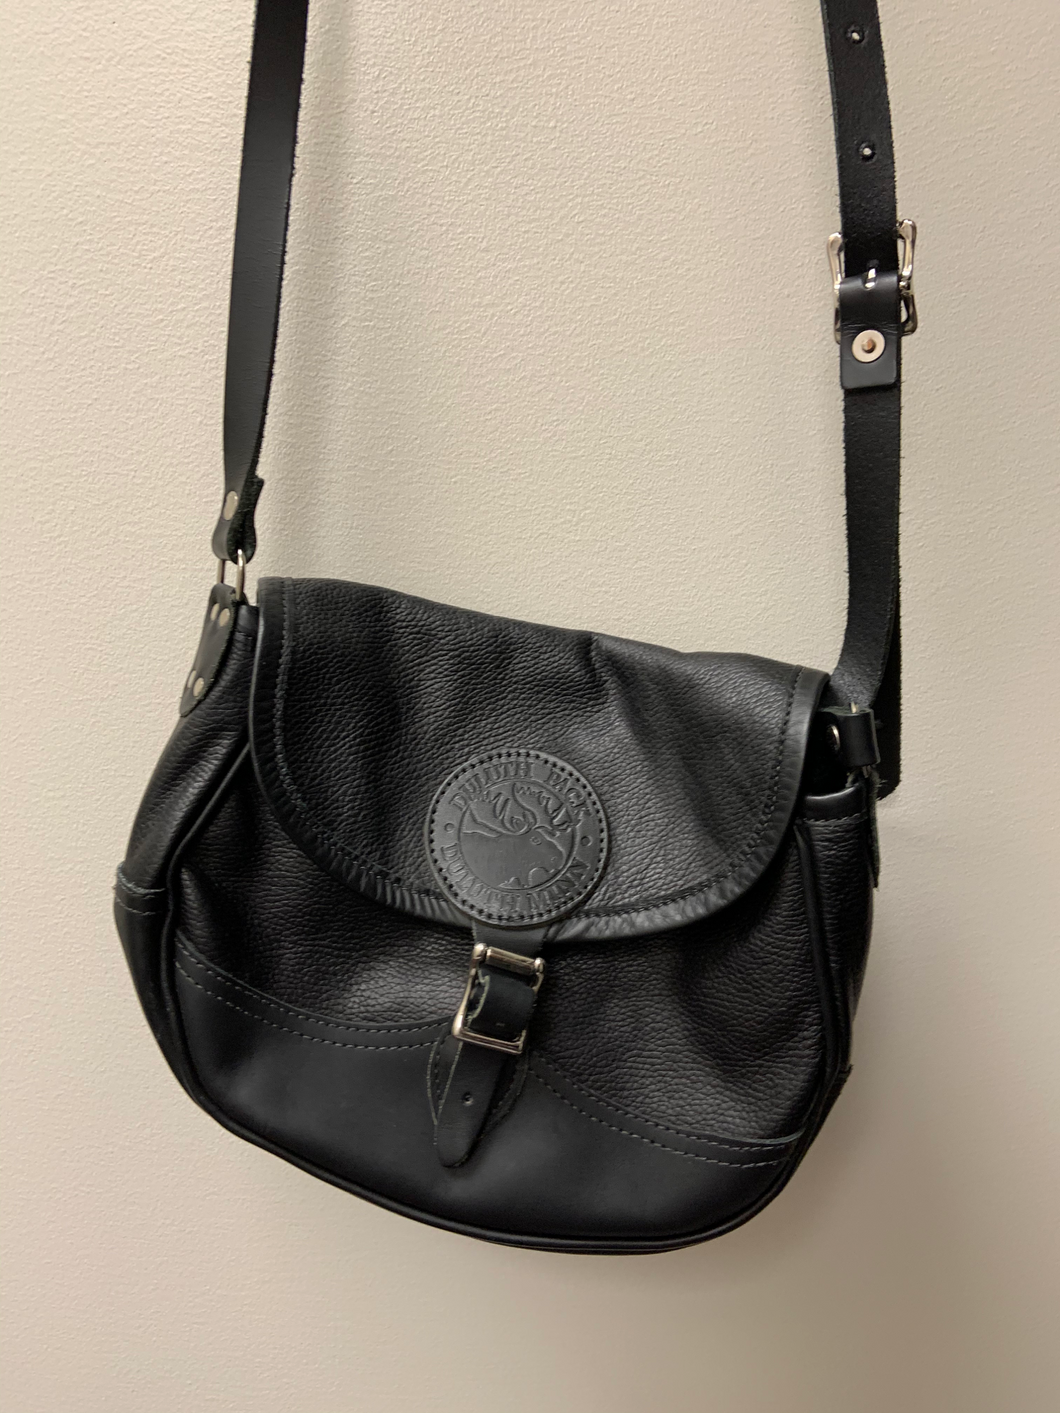 Black Leather Duluth Pack Purse